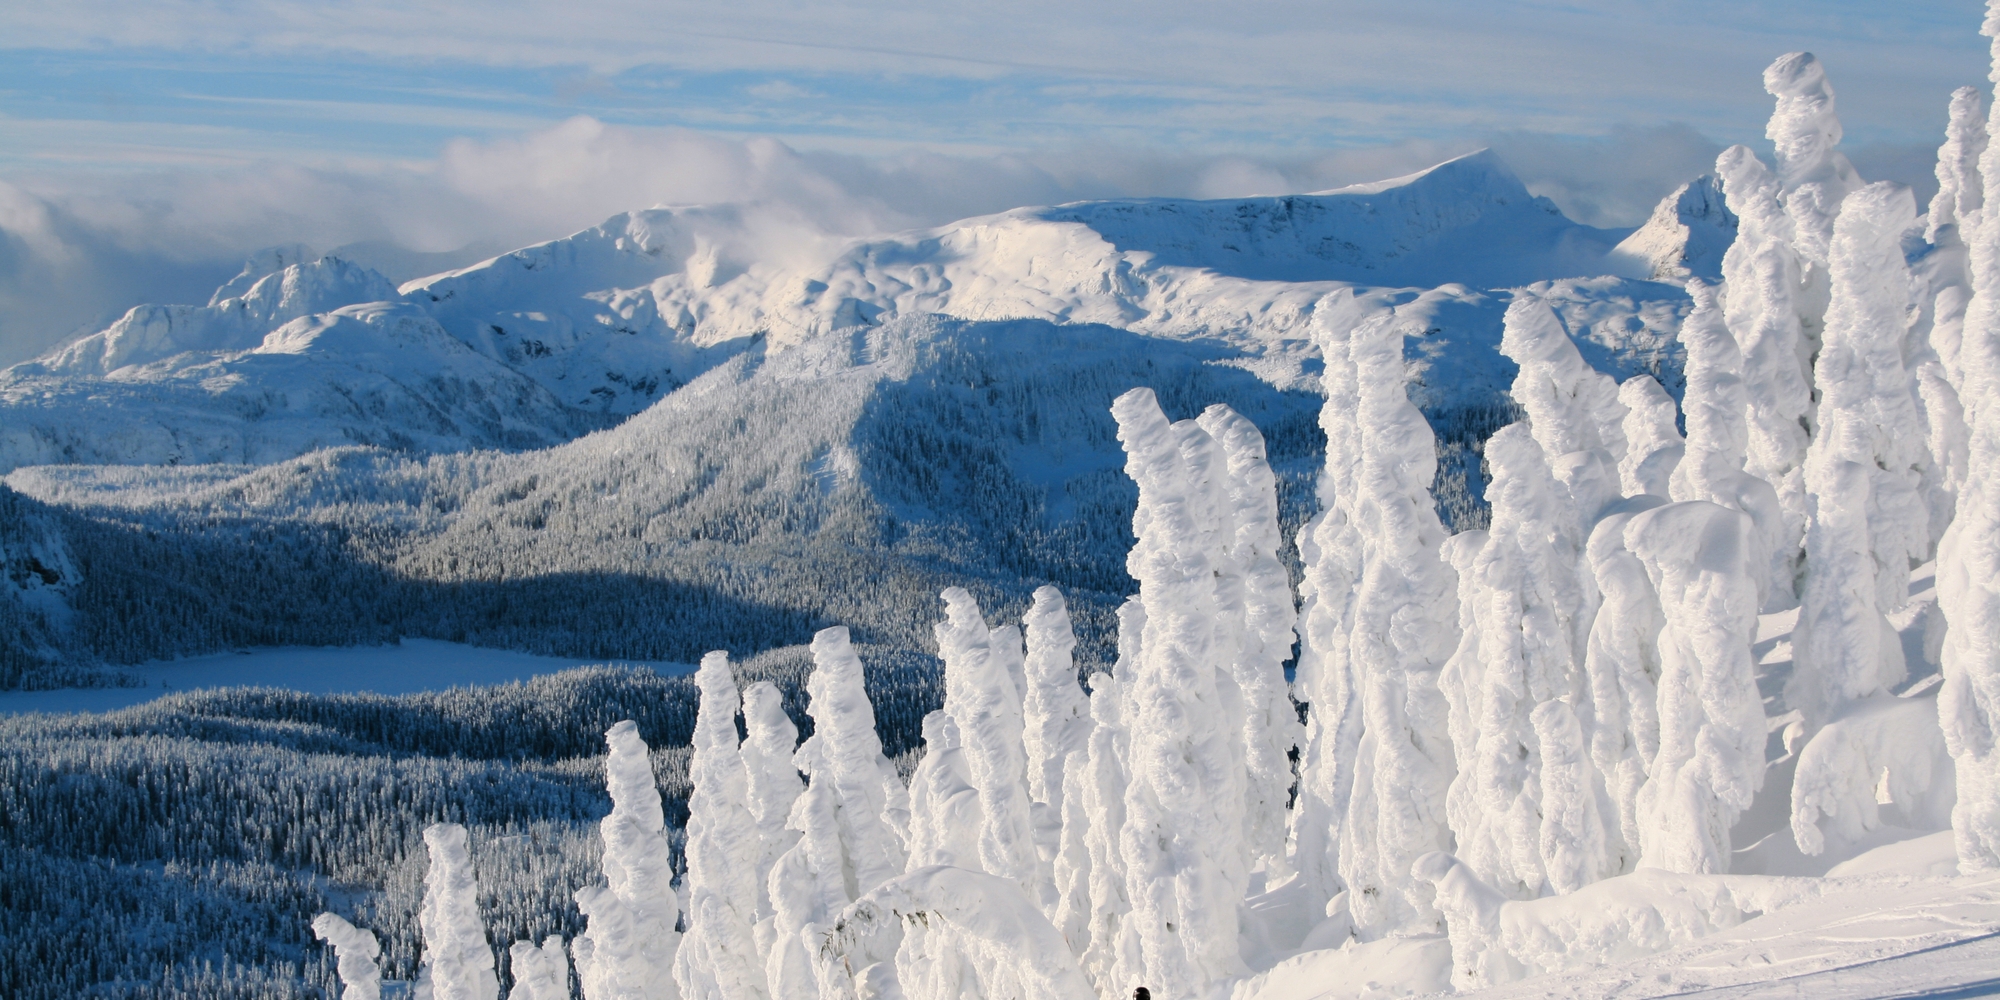 A person skiing amongst snow ghosts at Mount Washington Alpine Resort with now-covered mountains in the background